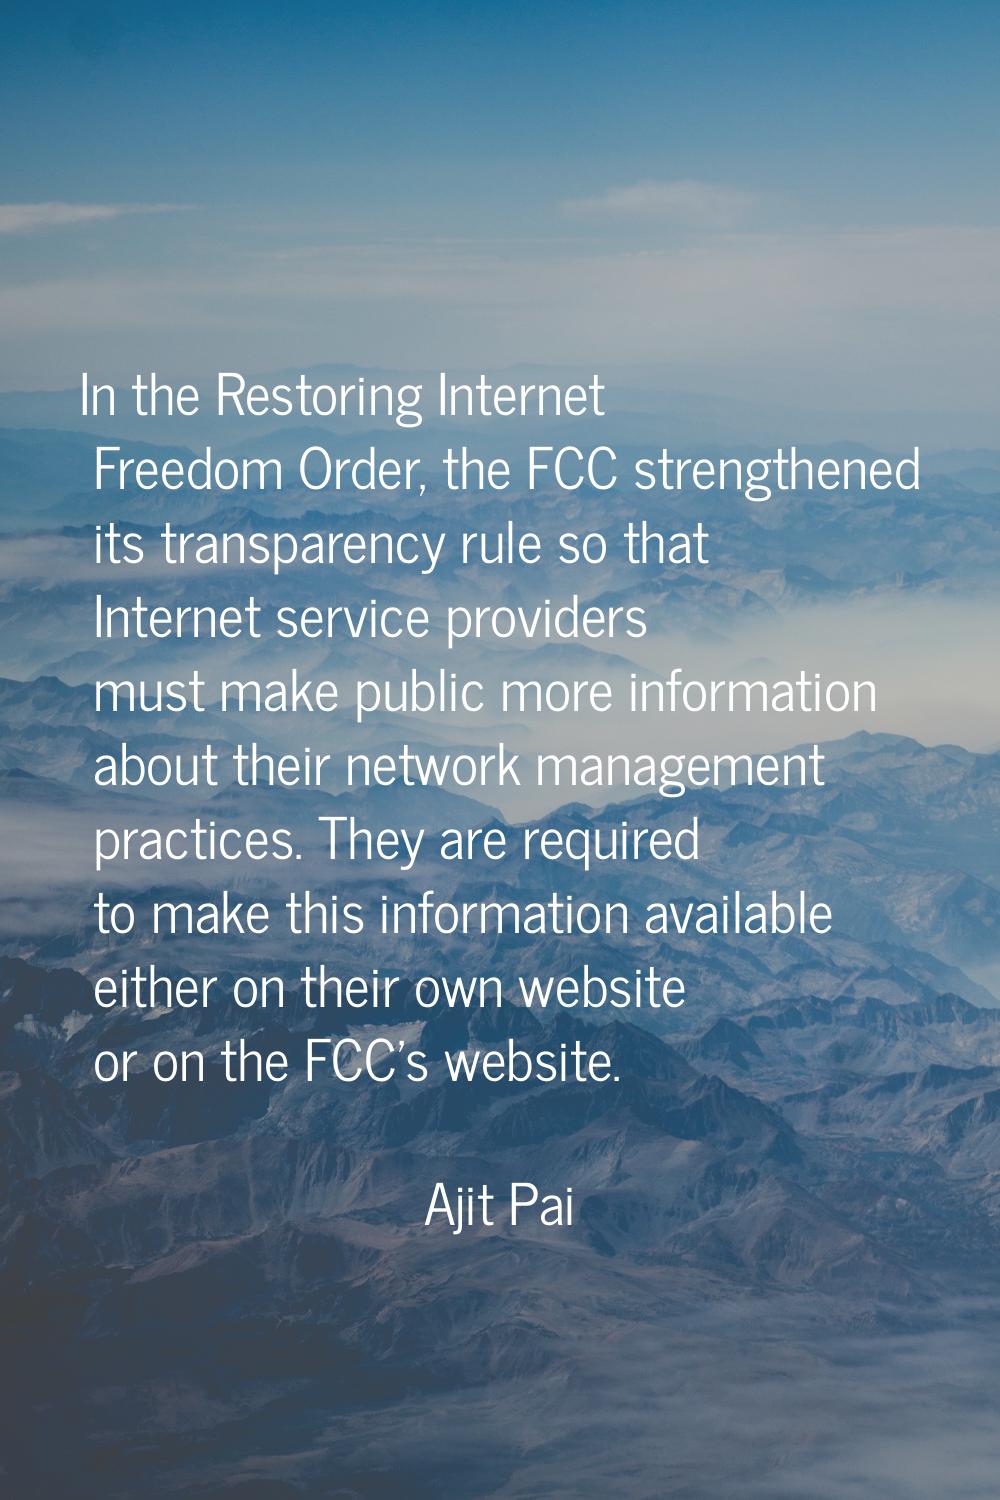 In the Restoring Internet Freedom Order, the FCC strengthened its transparency rule so that Interne